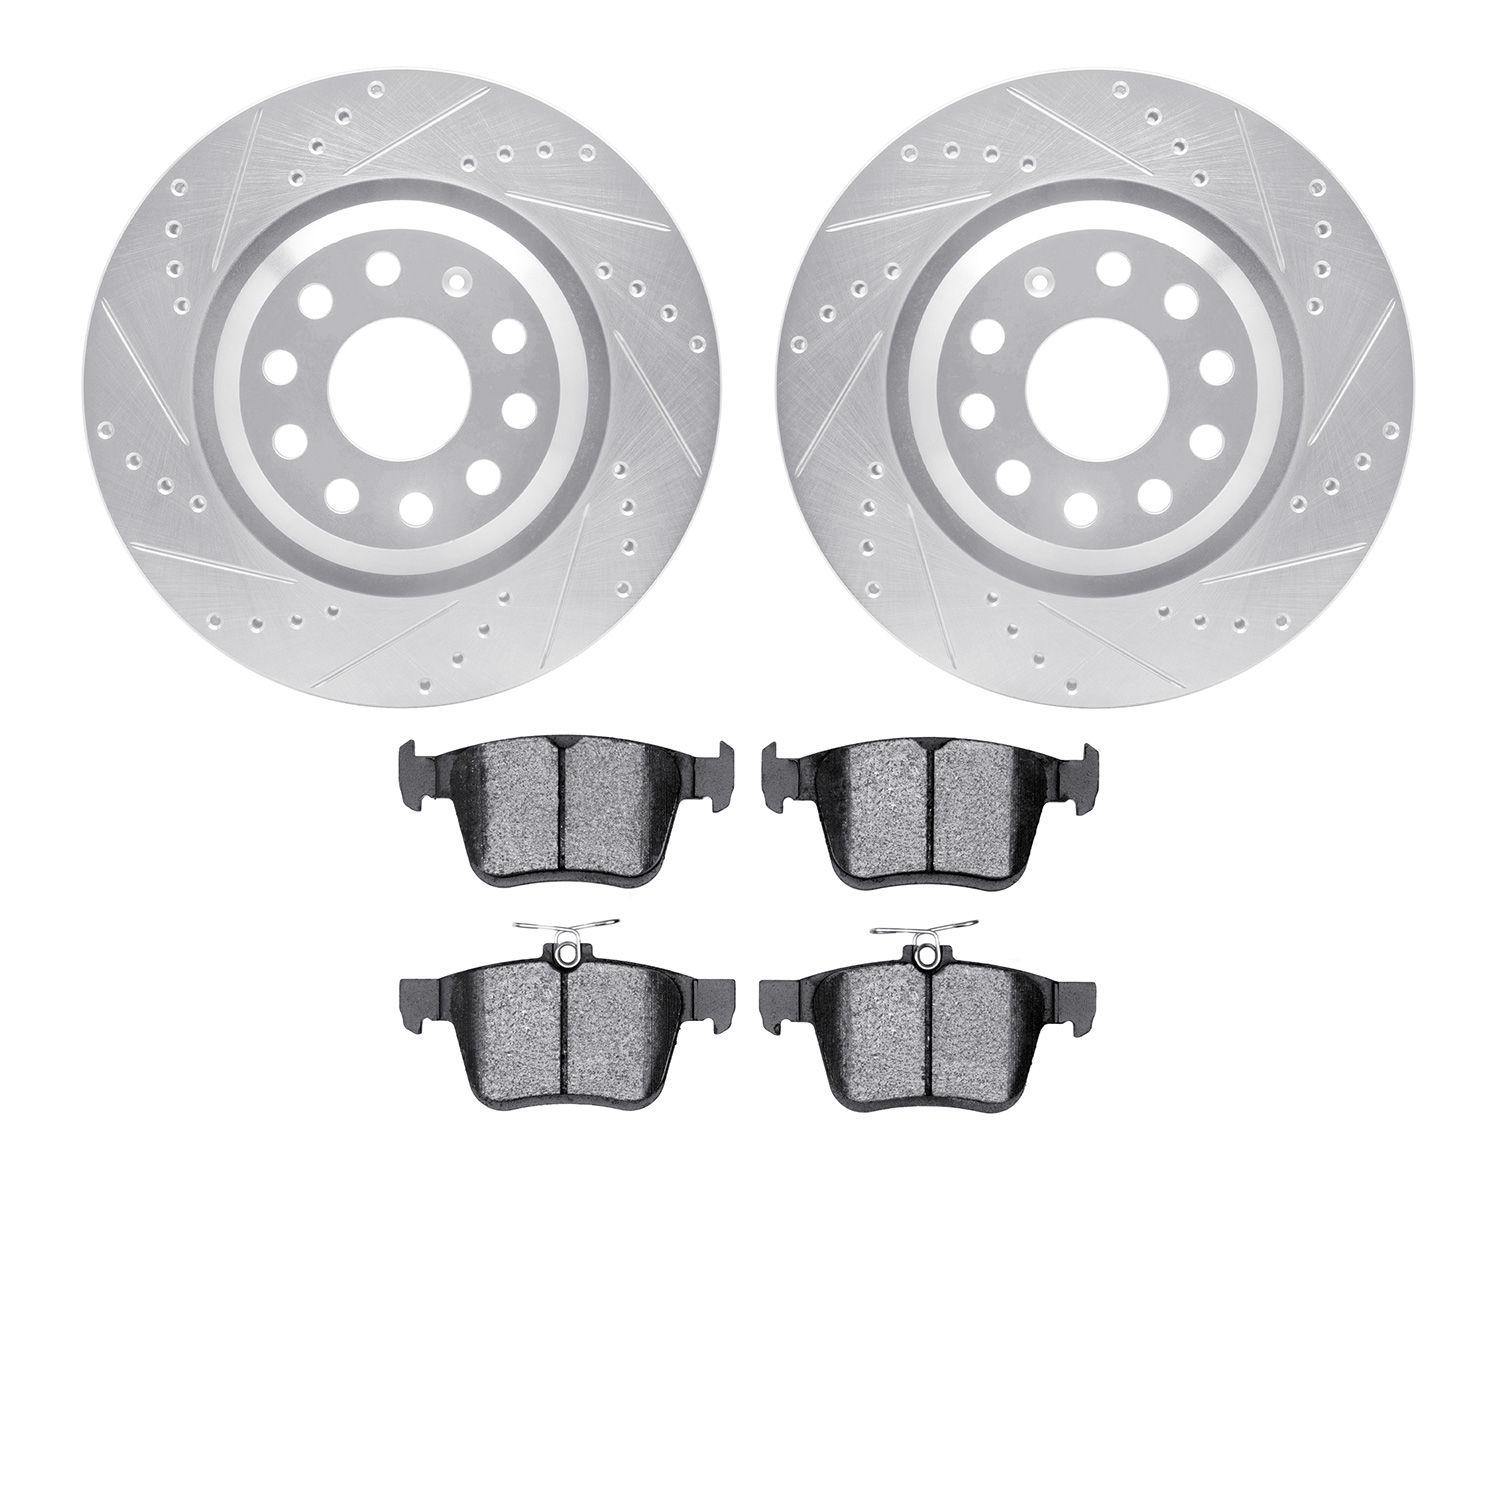 7602-74037 Drilled/Slotted Brake Rotors w/5000 Euro Ceramic Brake Pads Kit [Silver], Fits Select Audi/Volkswagen, Position: Rear